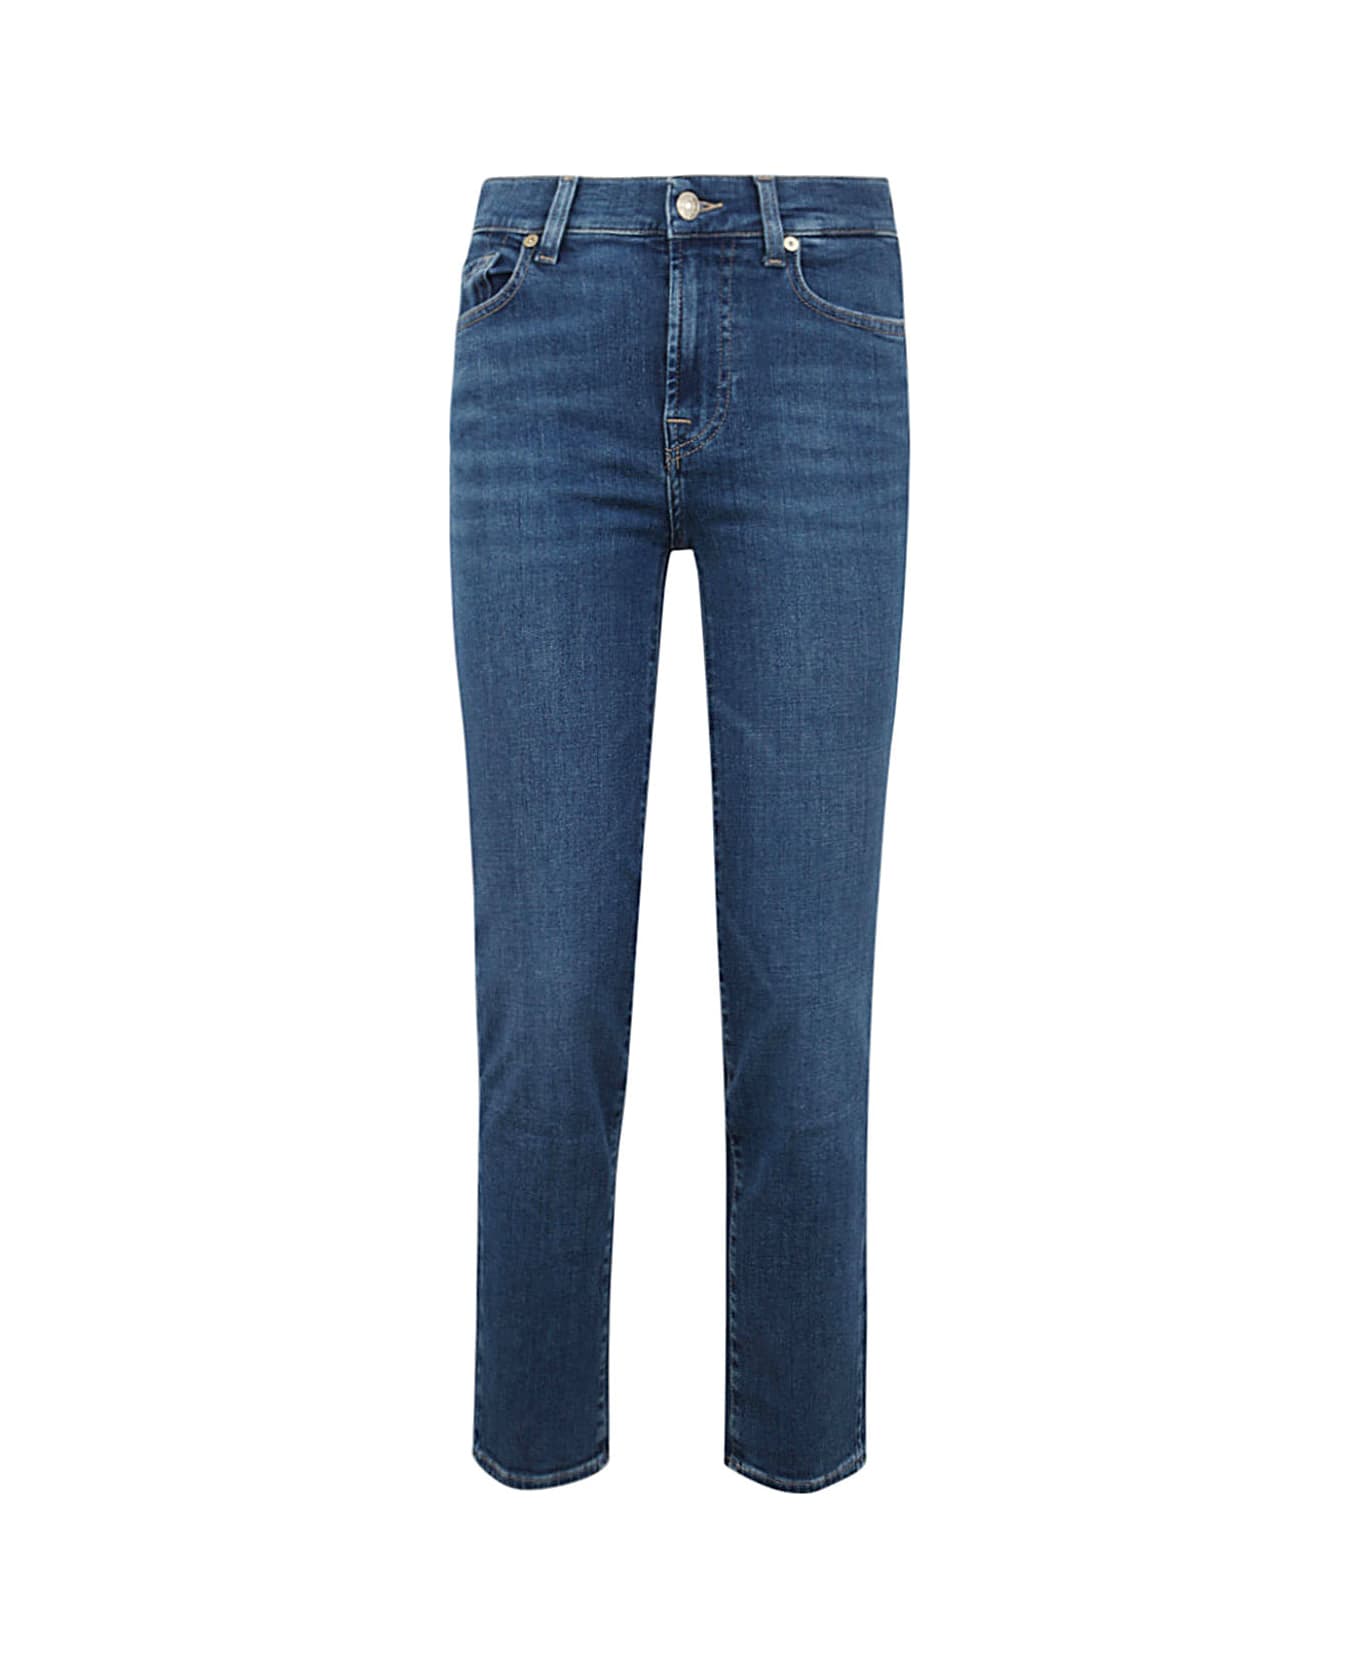 7 For All Mankind The Straight Crop Slim Illusion Saturday - Mid Blue